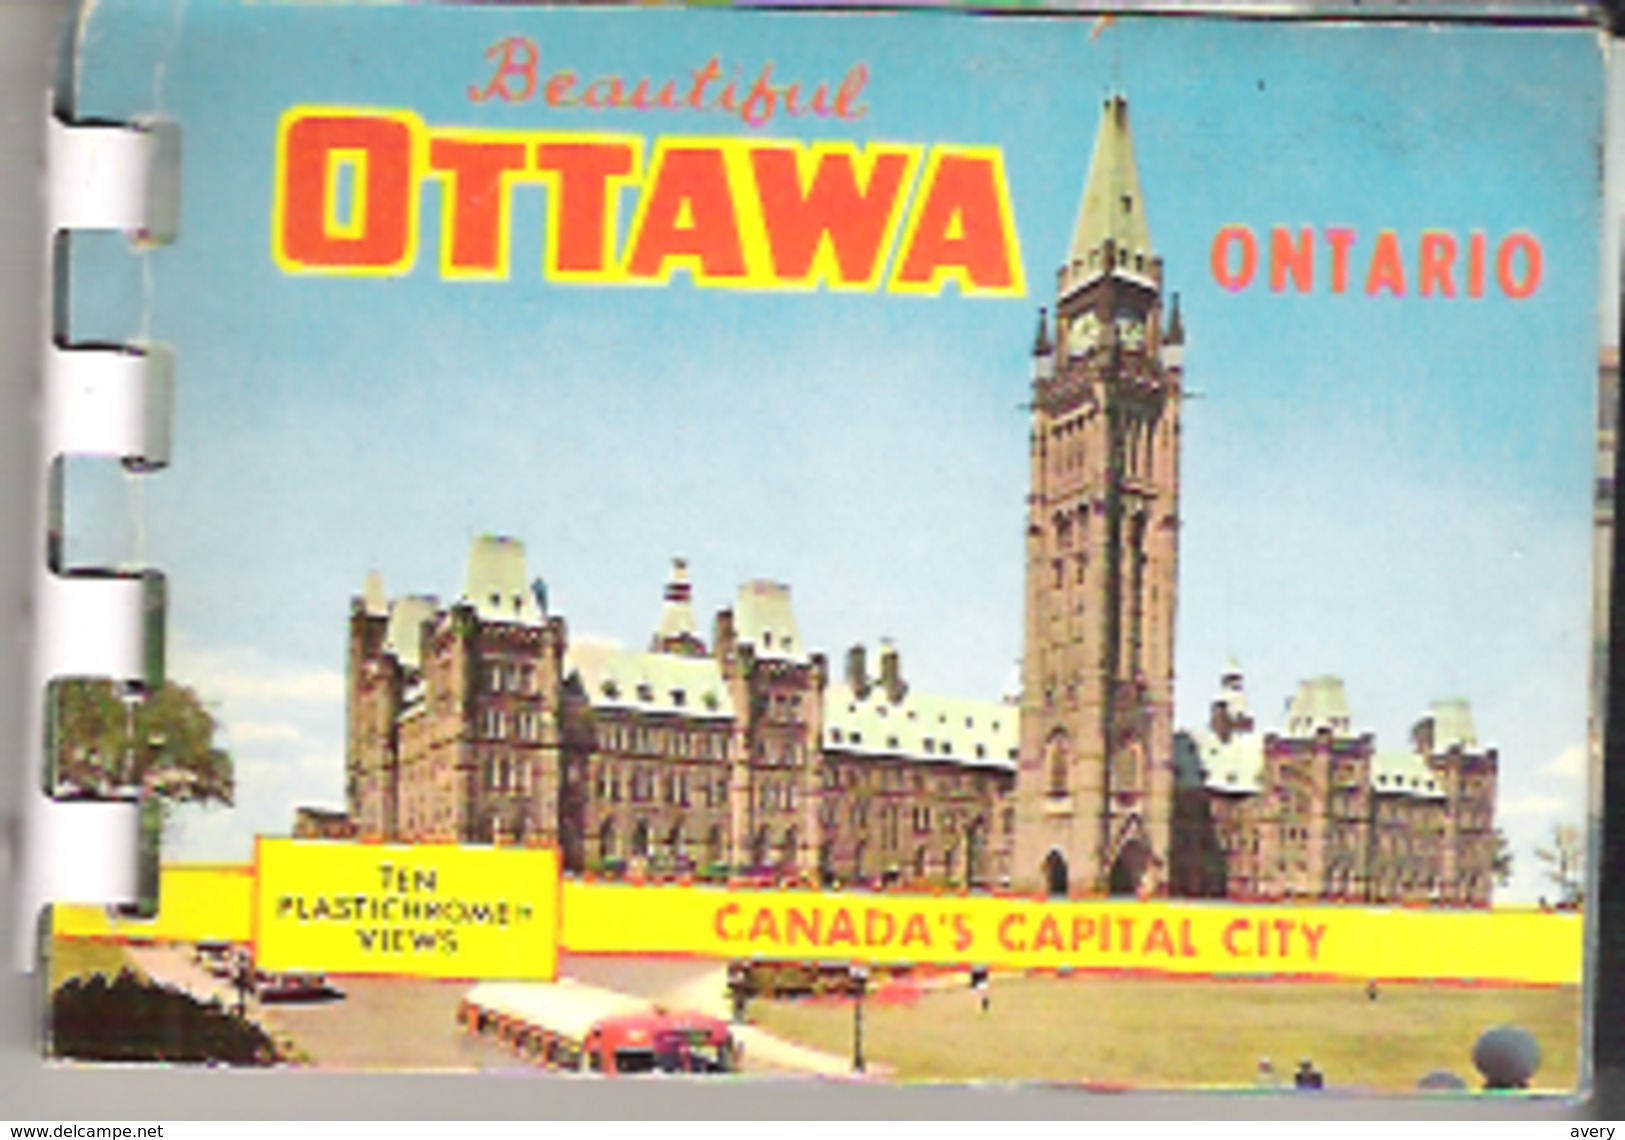 Picture Booklet Of Beautiful, Ottawa, Ontario  Canada's Capital City - North America